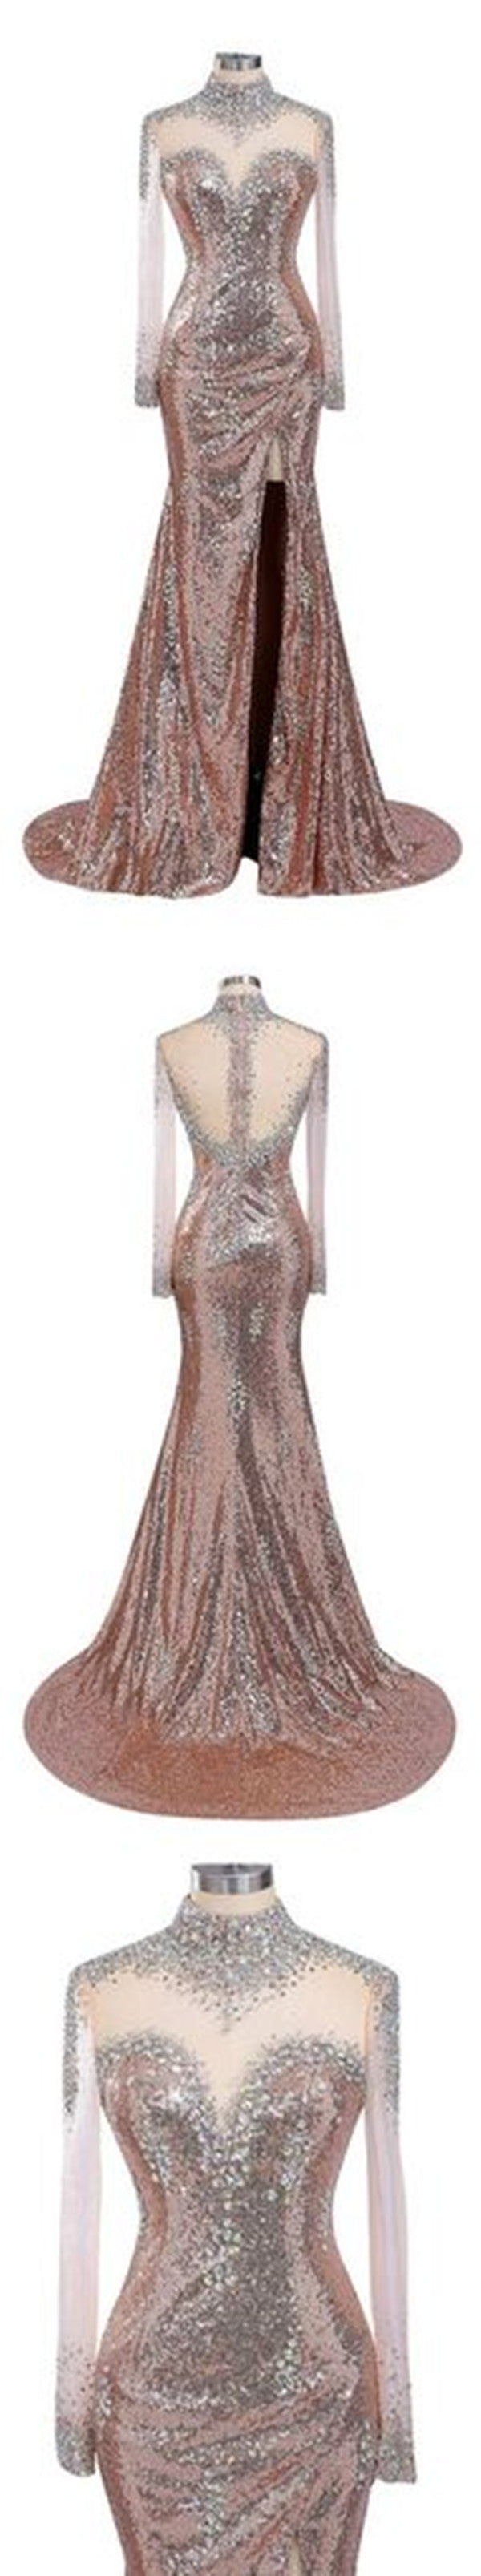 Long Sleeves Sexy Side Split High Neck Sequin Shinning Long Prom Dresses